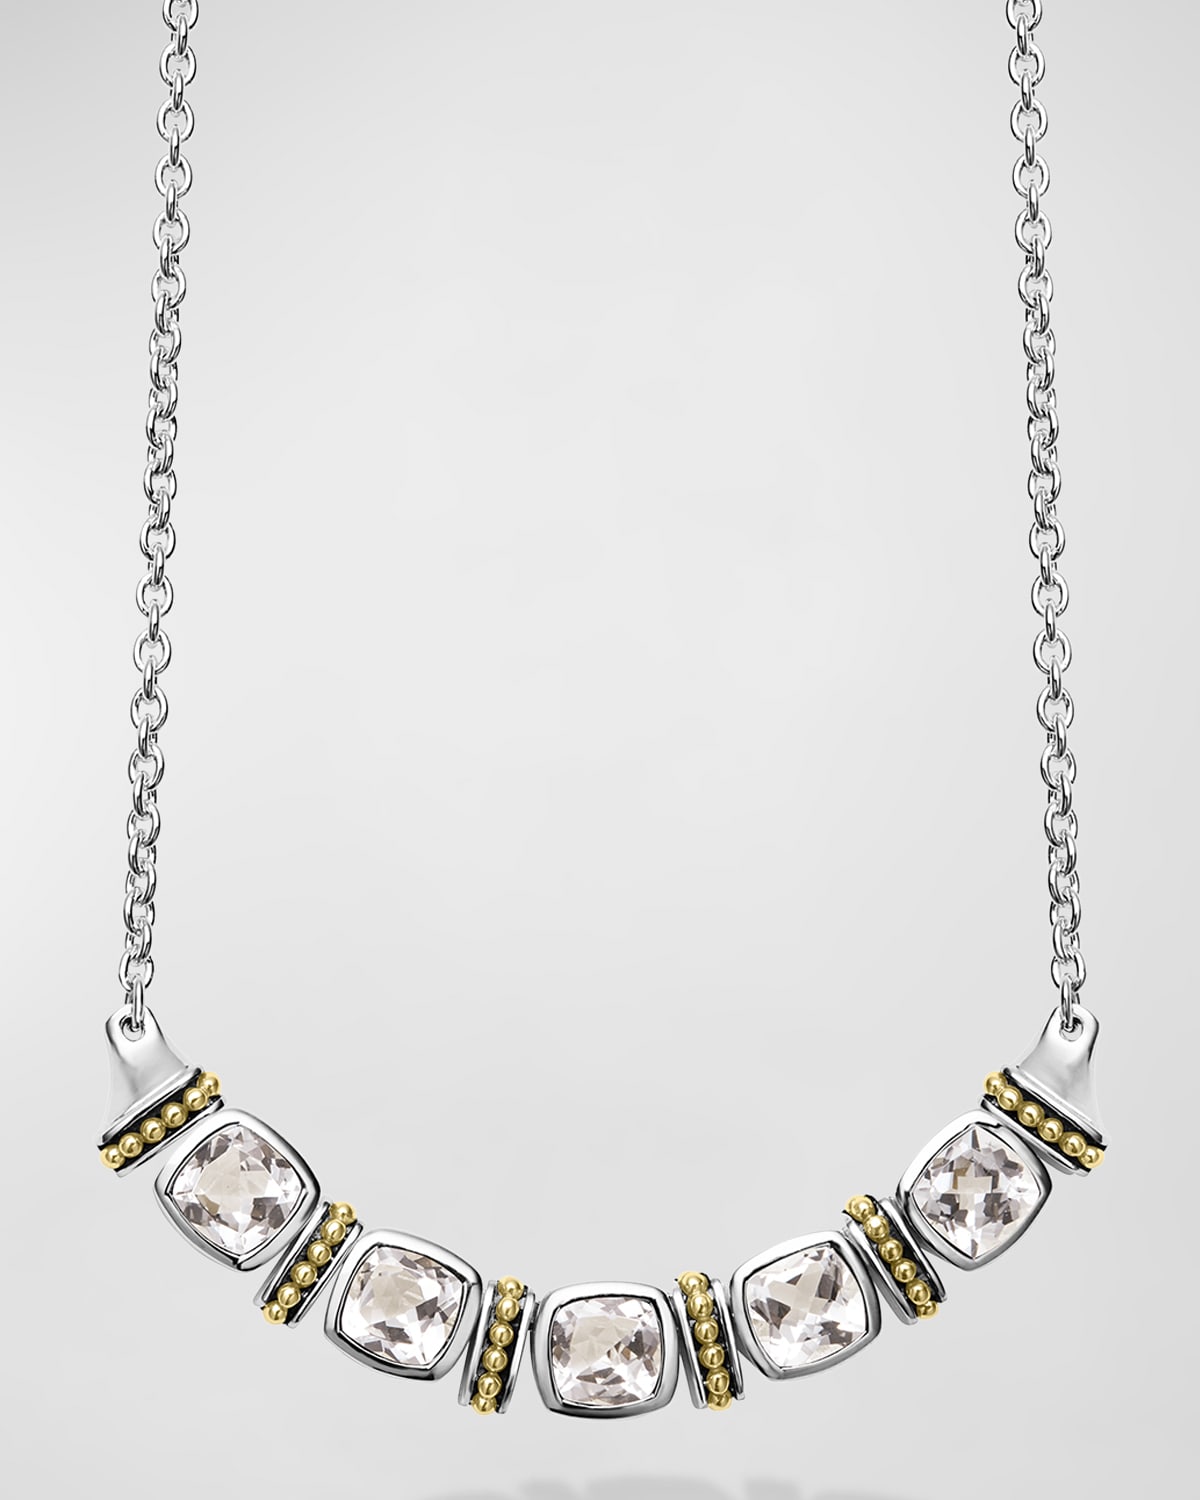 Caviar White Topaz 5-Station Necklace in Sterling Silver